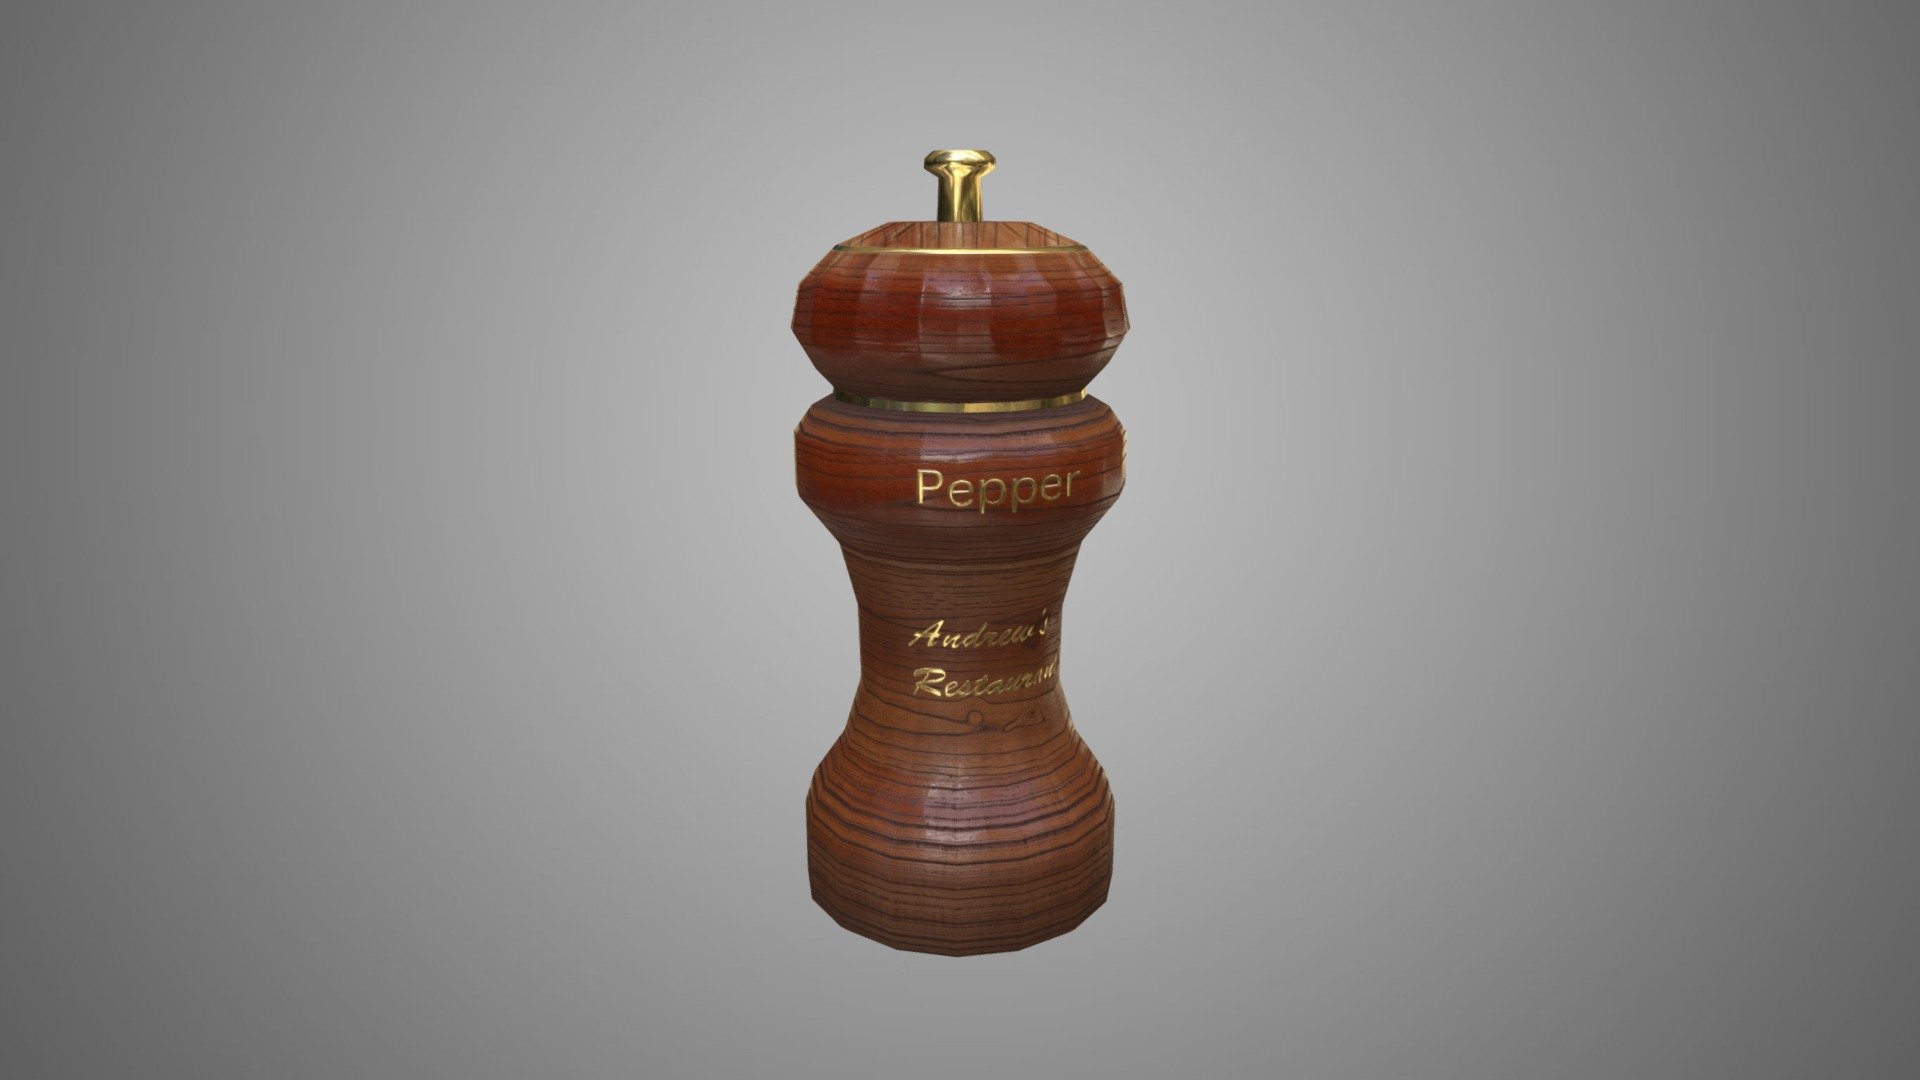 A pepper grinder that I modeled in Maya and texture using Substance Designer for a tutorial Series and a cafe scene 3d model